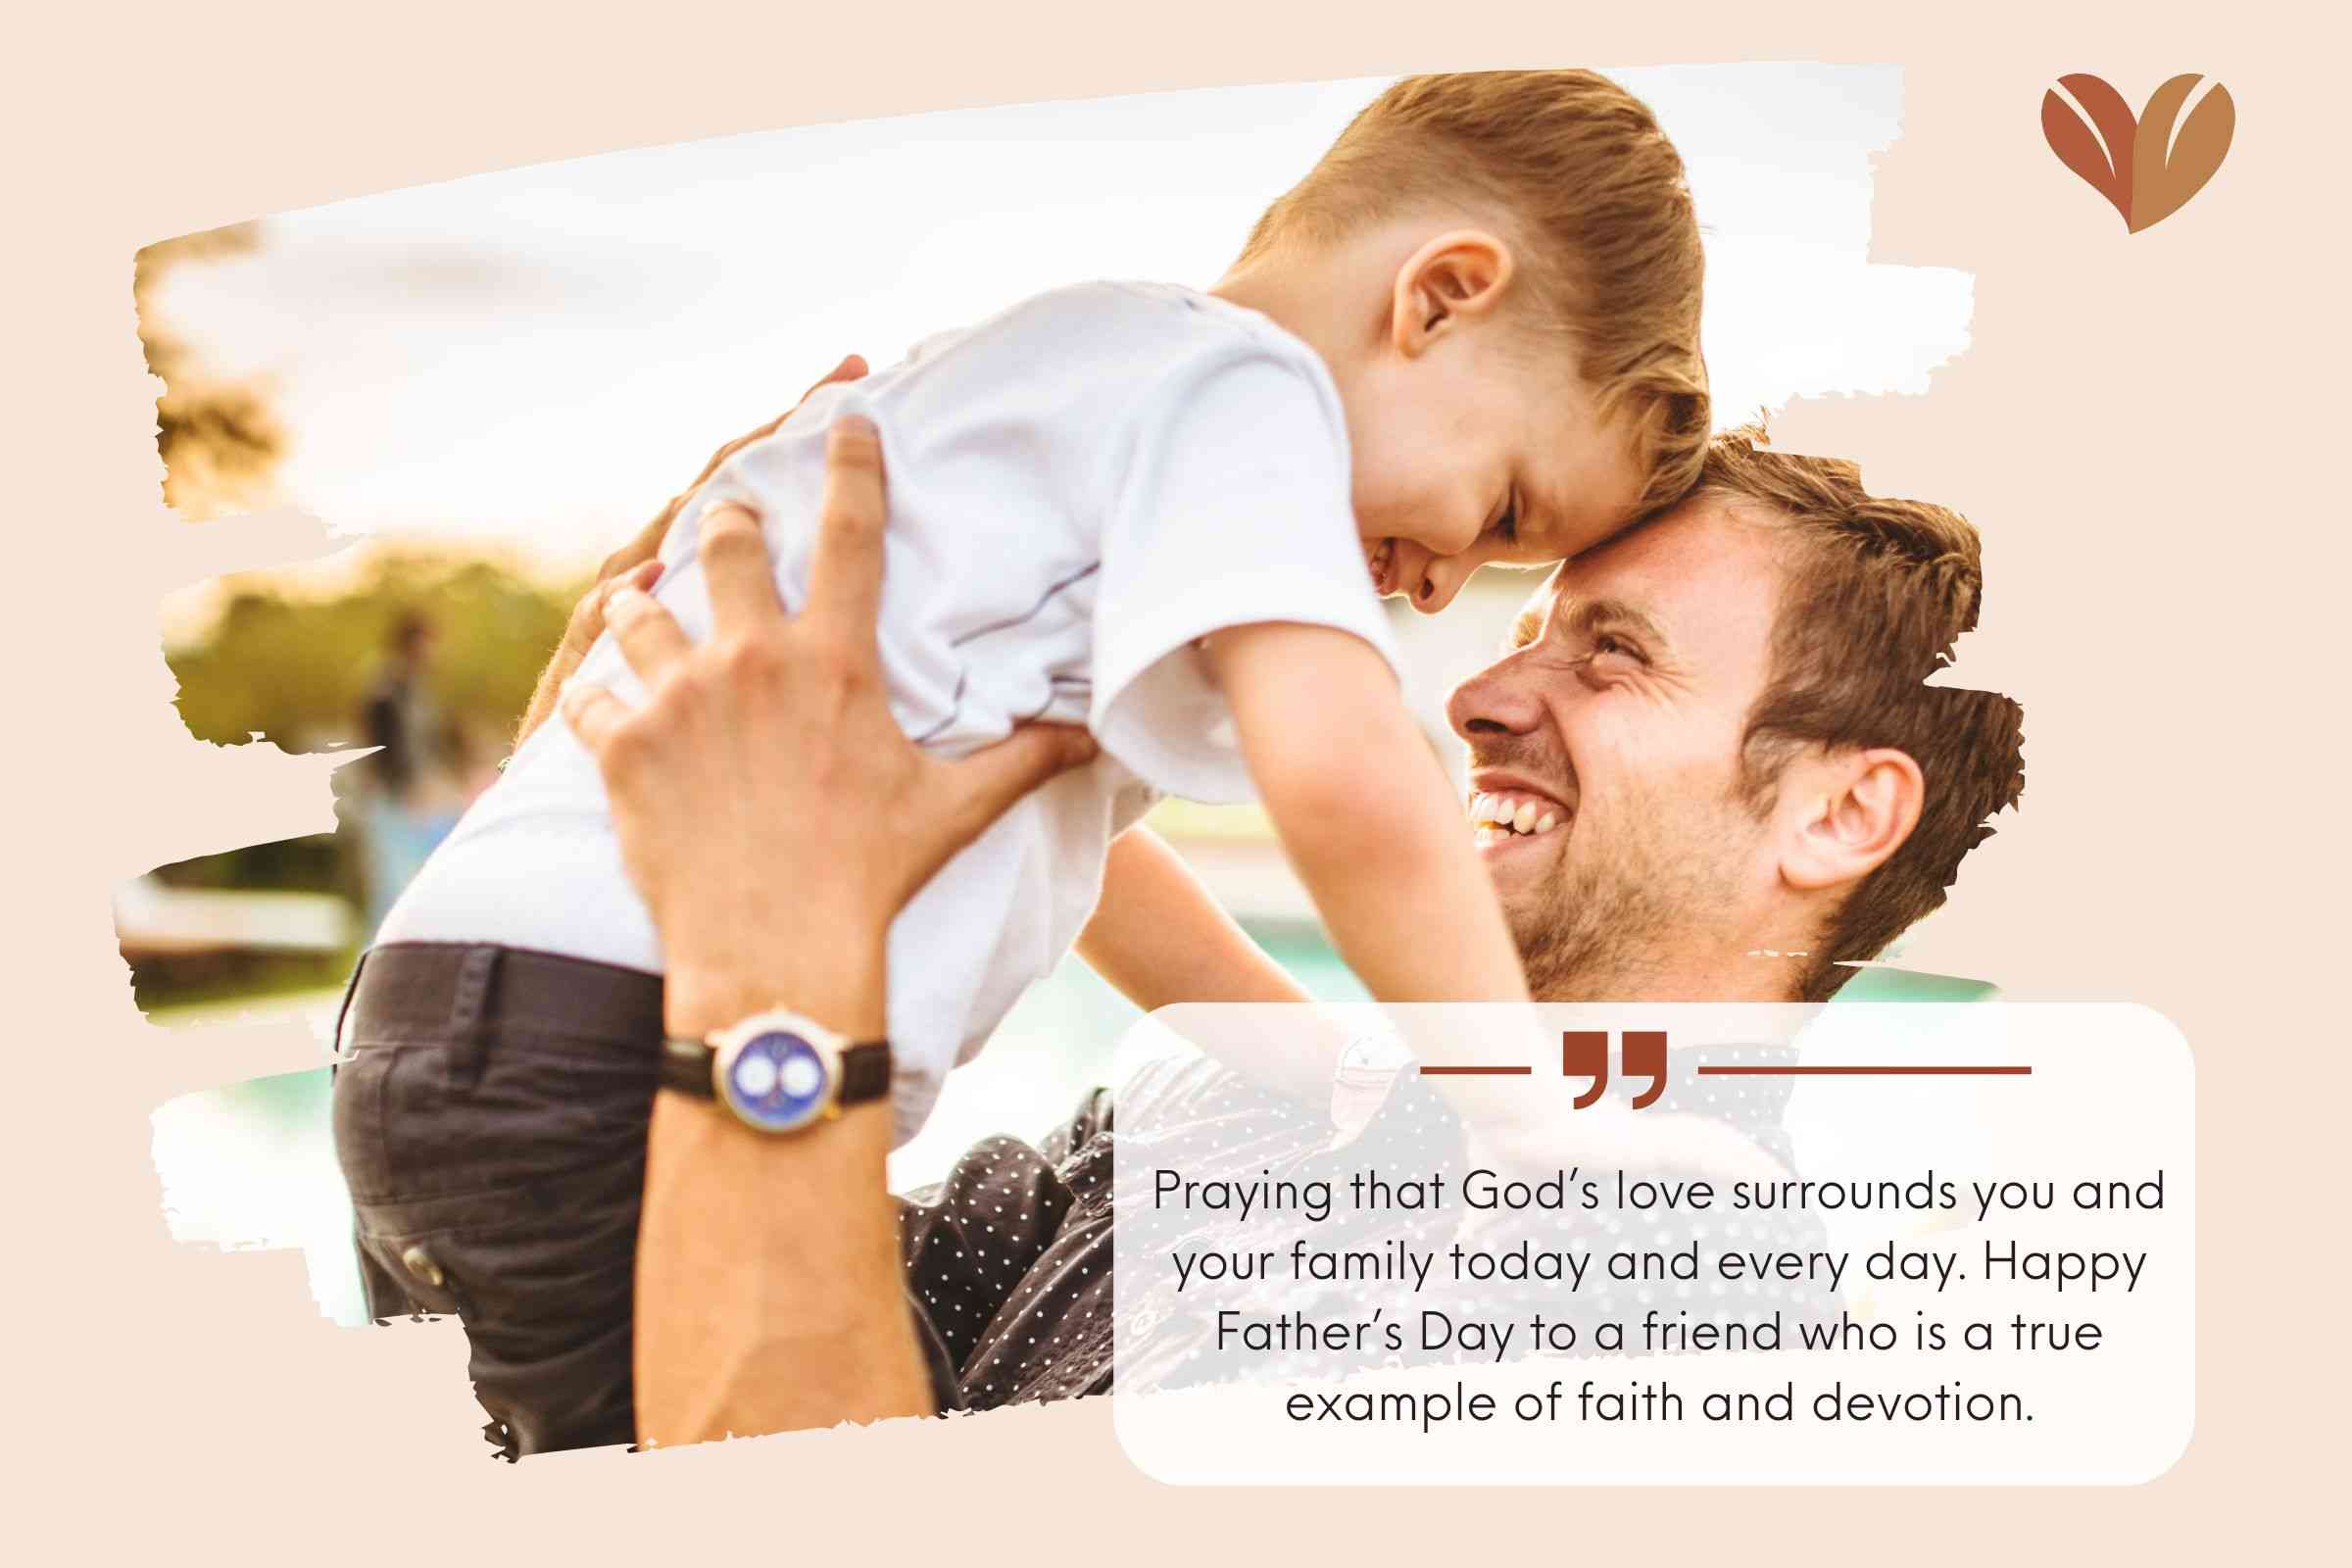 Christian Father's Day Quotes: Embracing God's Love and Family